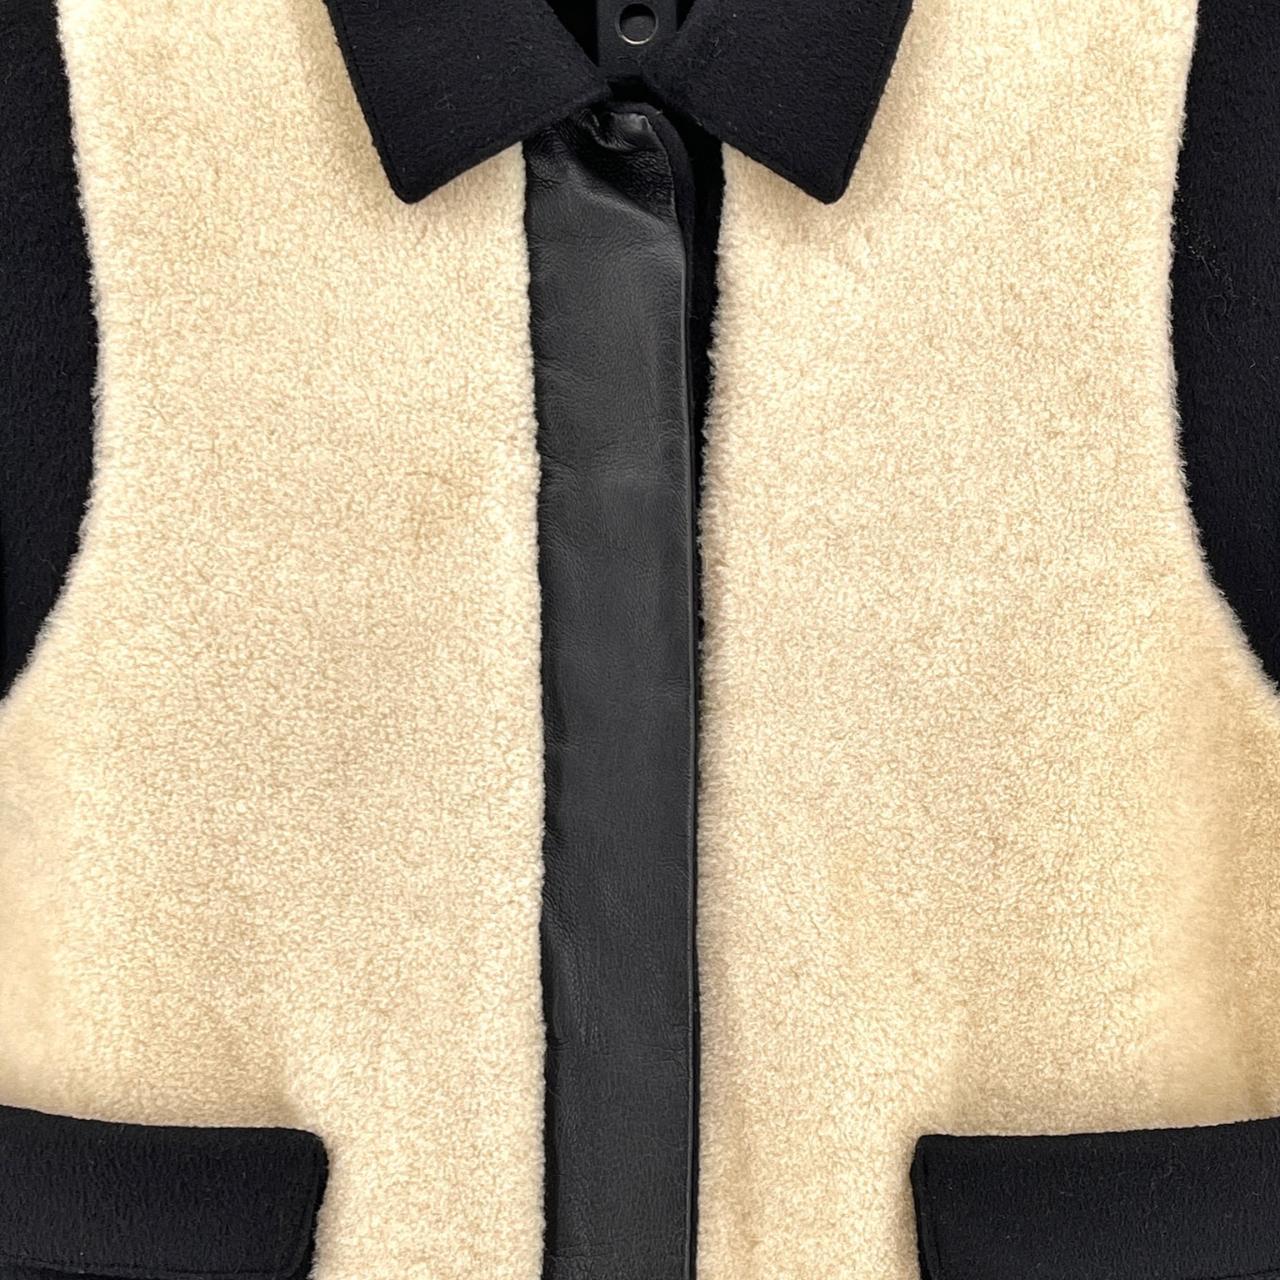 Product Image 3 - This black and cream jacket